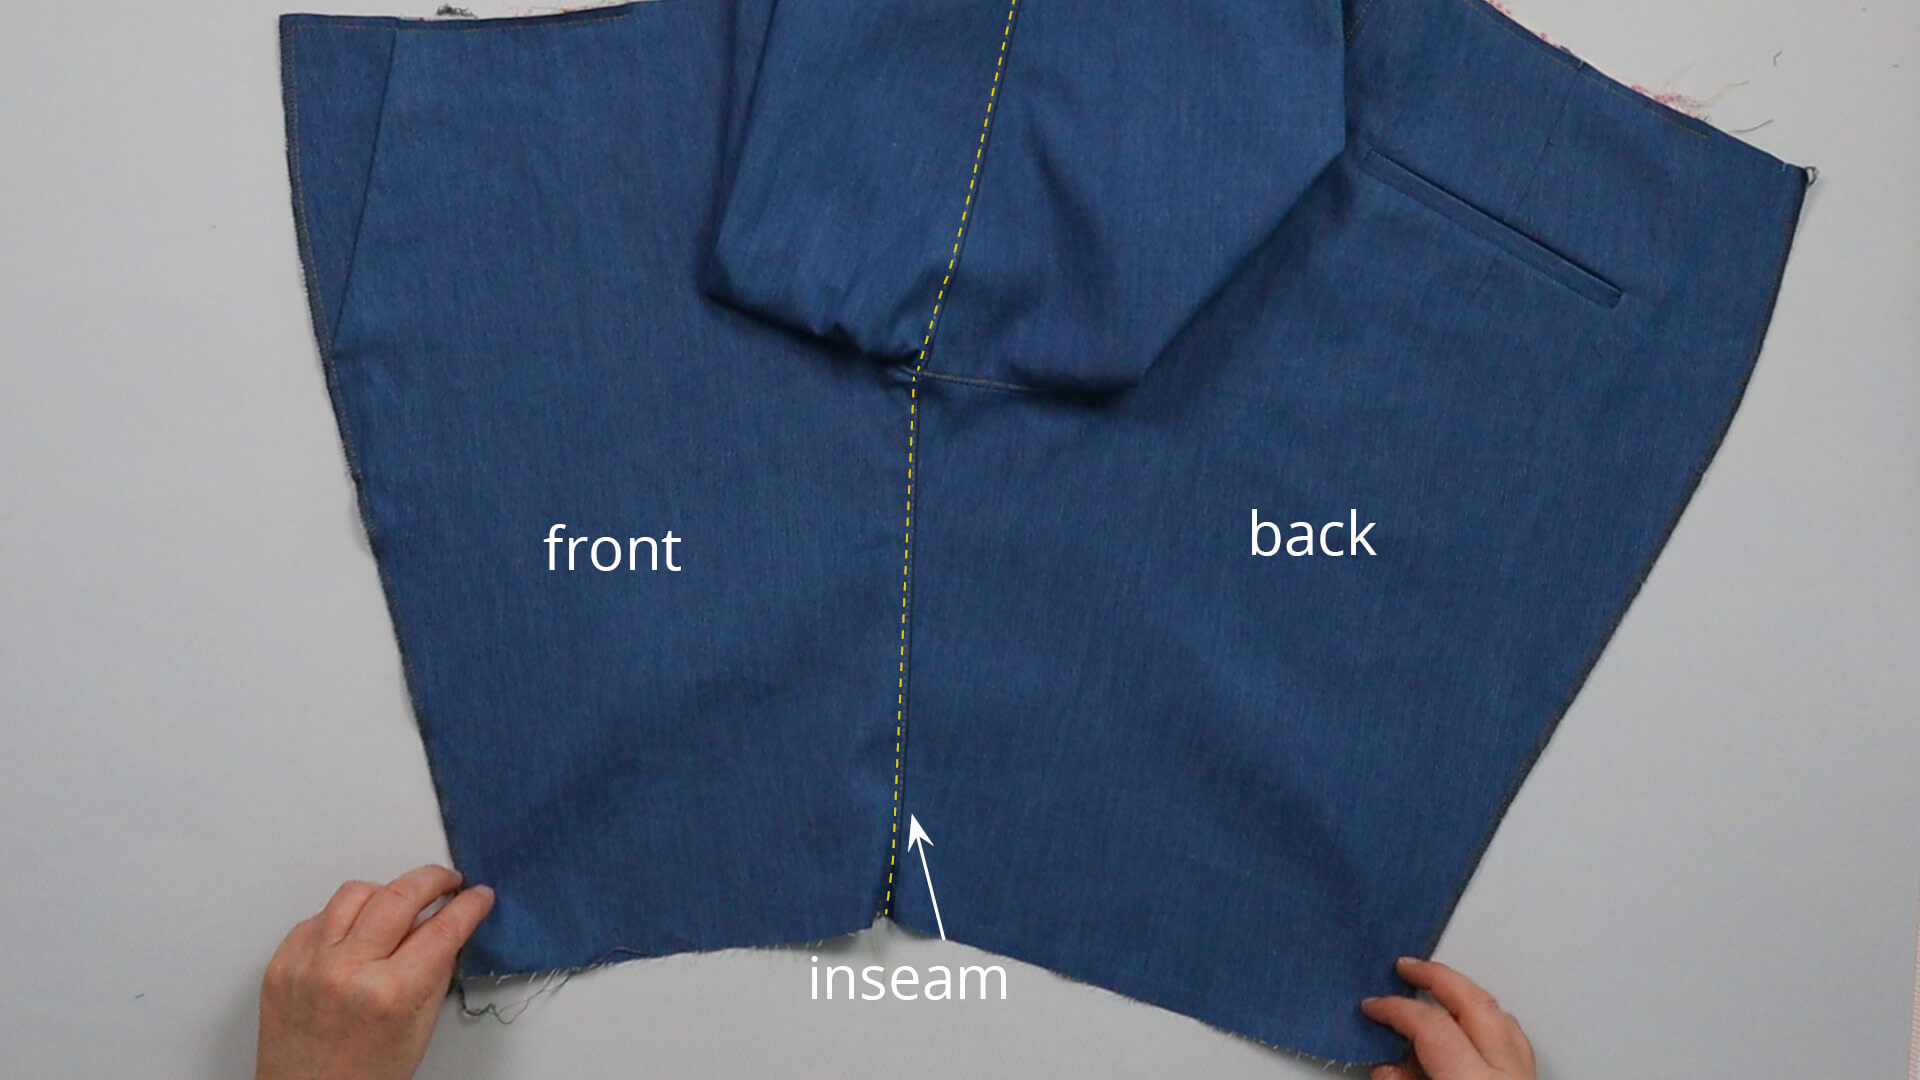 The picture shows the decorative stitching on the inside leg seam.